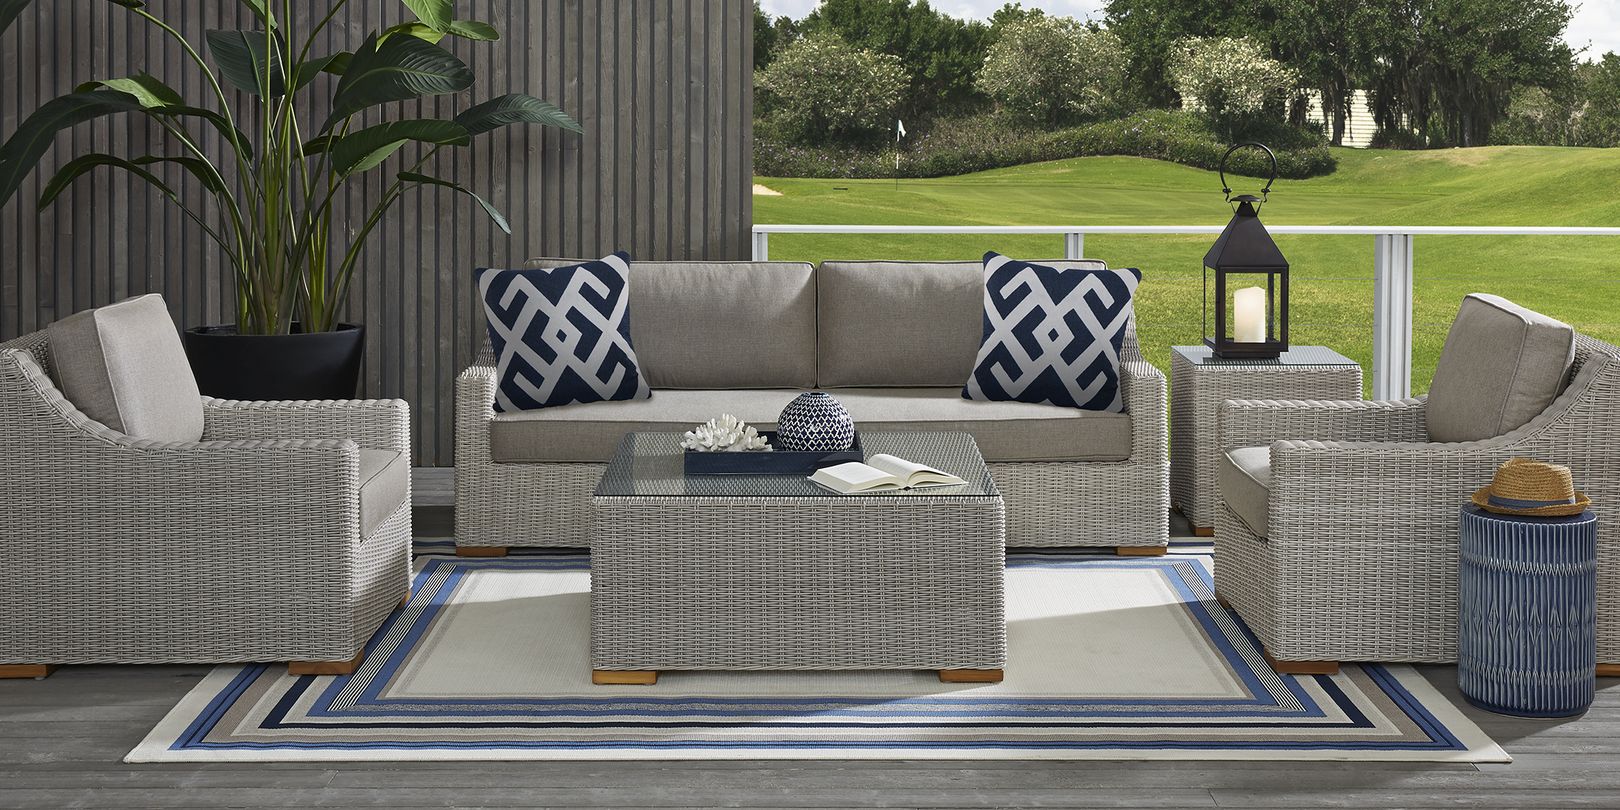 photo of a patio seating set with a planter